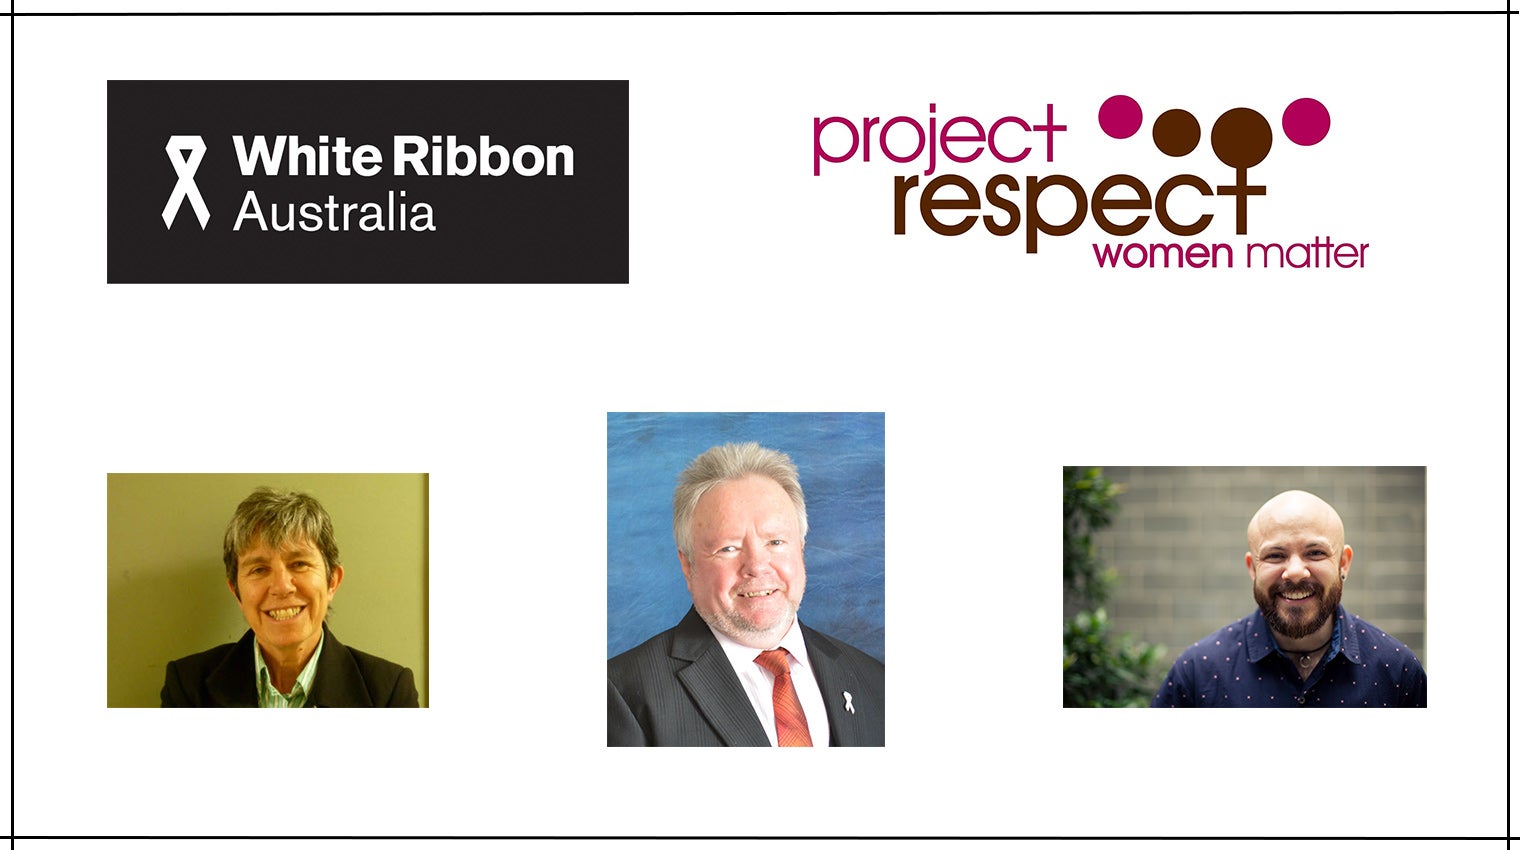 From top left: White Ribbon Foundation logo, Project Respect logo. From bottom left: Picture of Ludo McFerran, Tony Fitzgerald and Aram Hosie